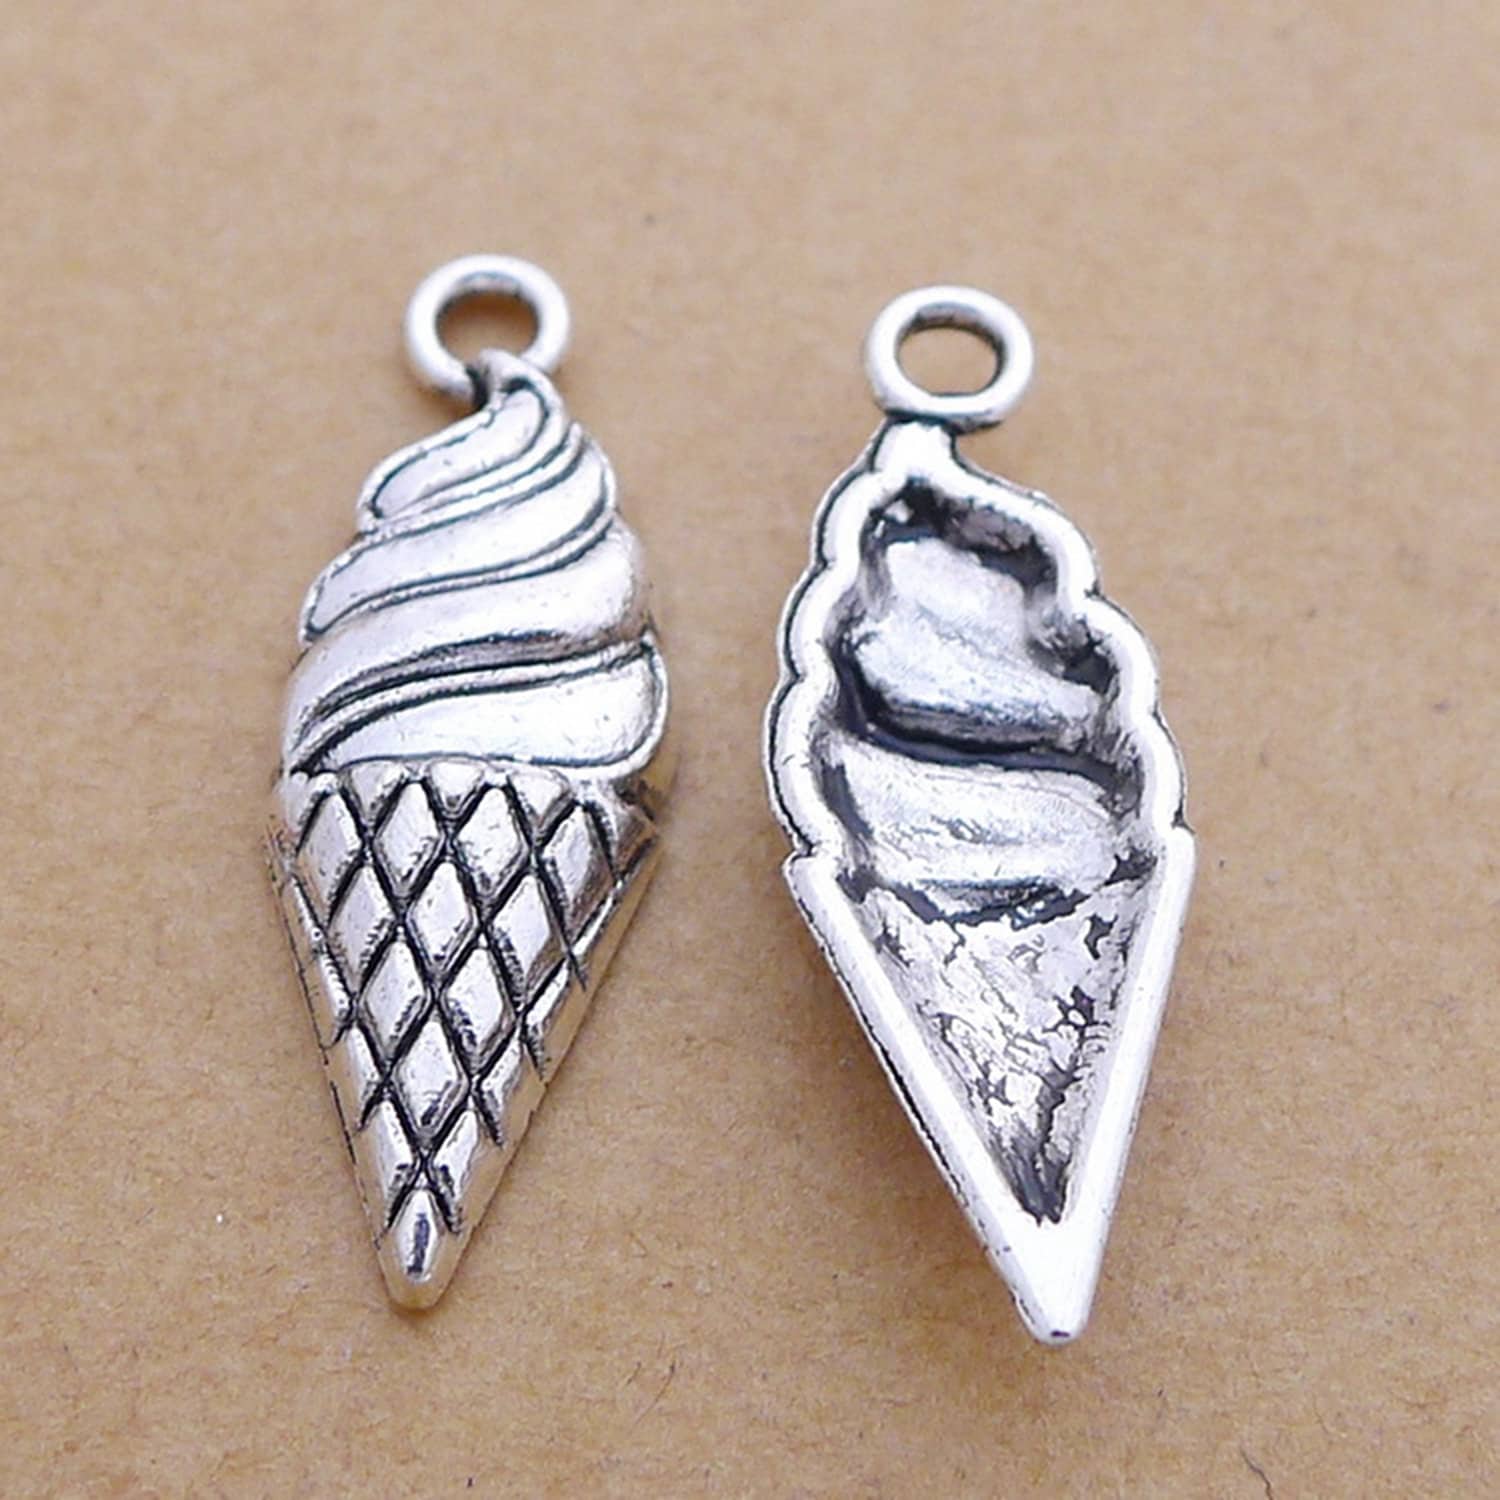  Hicarer 48 Pieces Resin Ice Cream Cup Charms Pendants